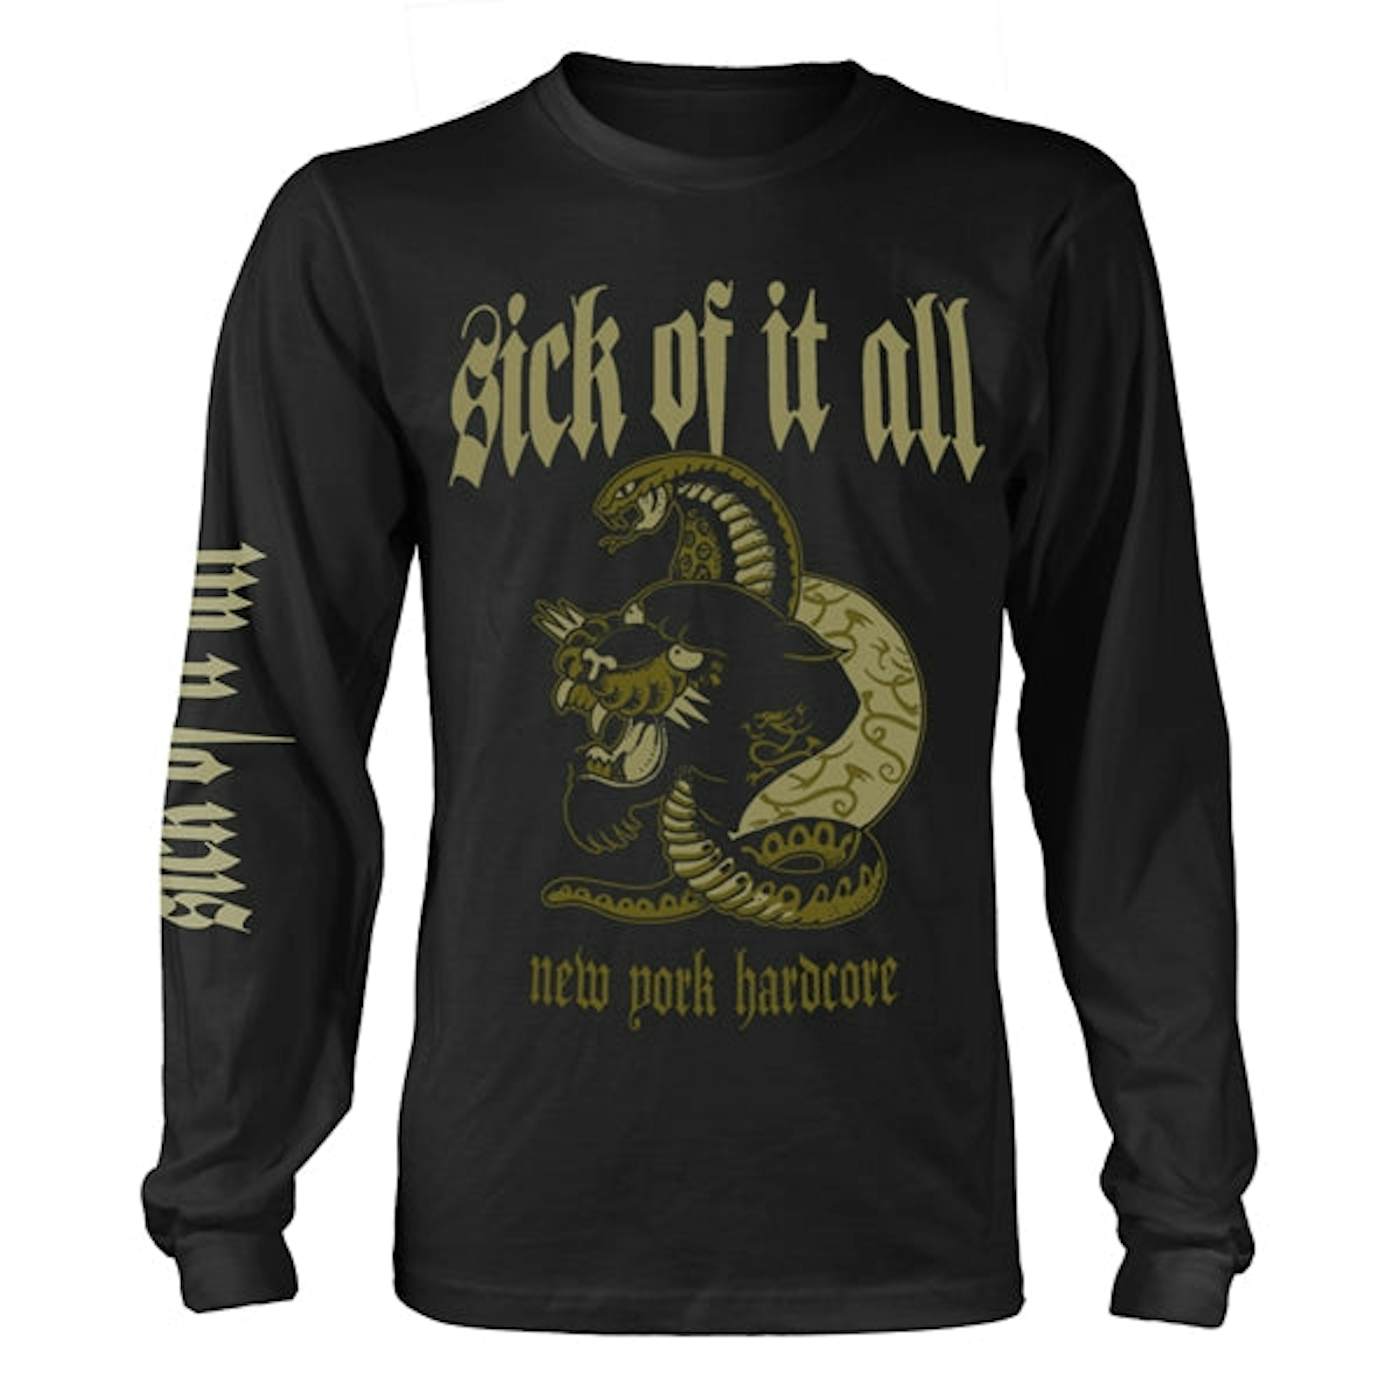 Sick Of It All Long Sleeve T Shirt - Panther